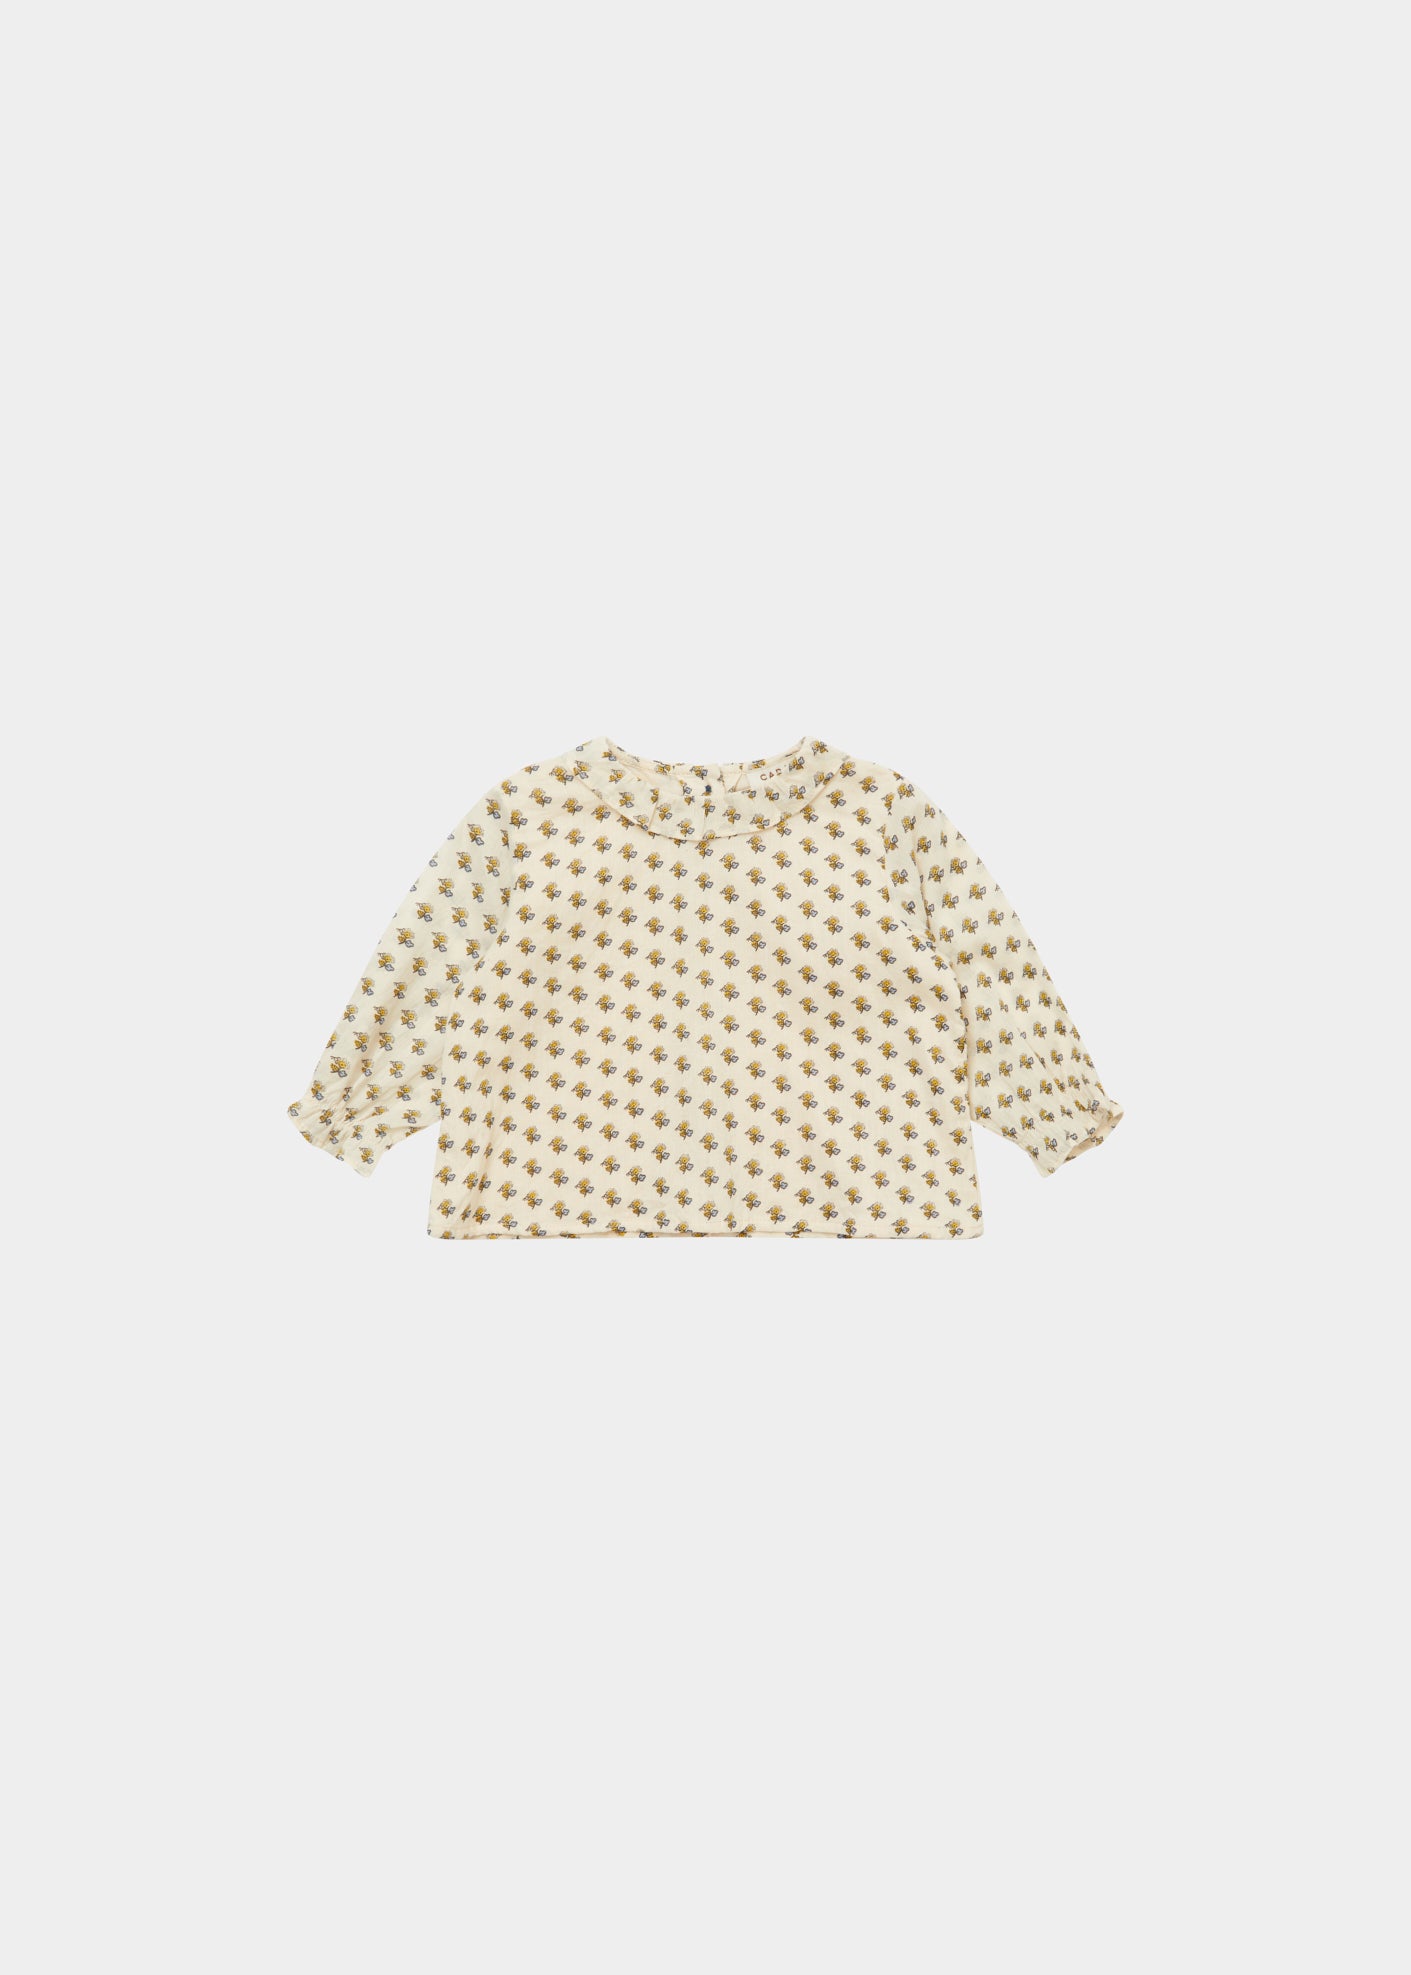 Baby Designer Tops - Amicia Baby Blouse - Posey Dot Print